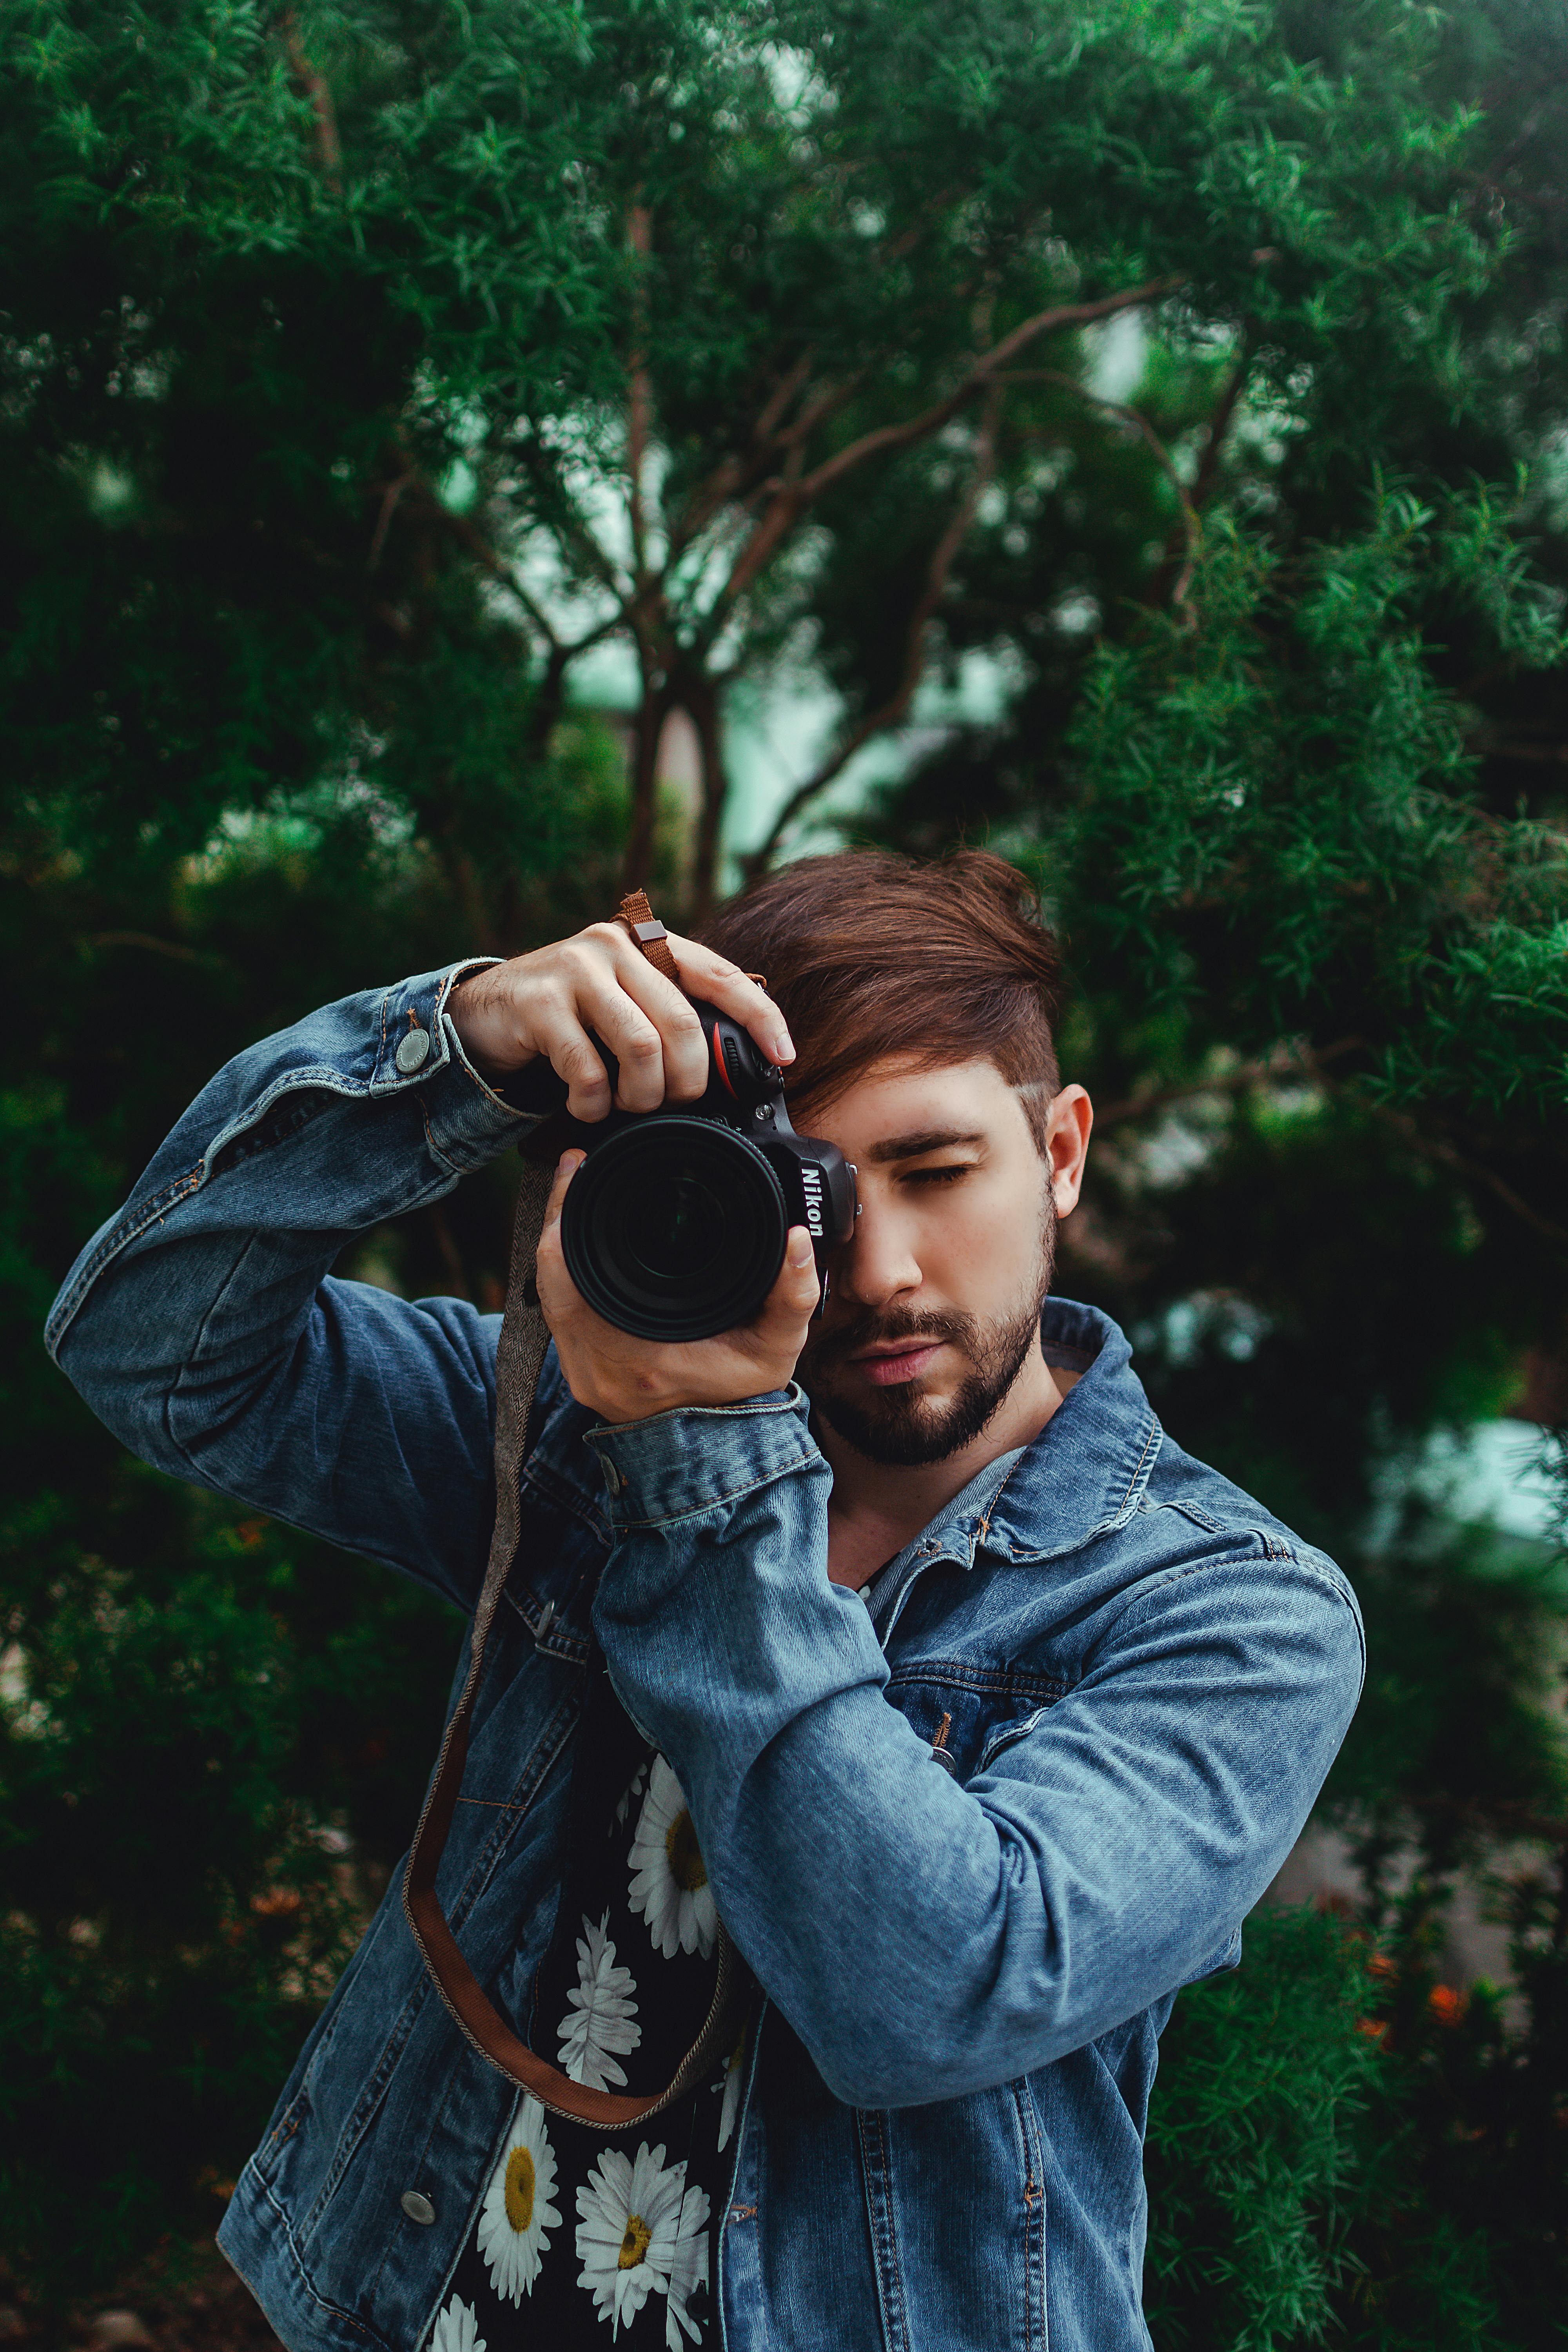 How To Pose For Photos: The Professional Guide | FashionBeans